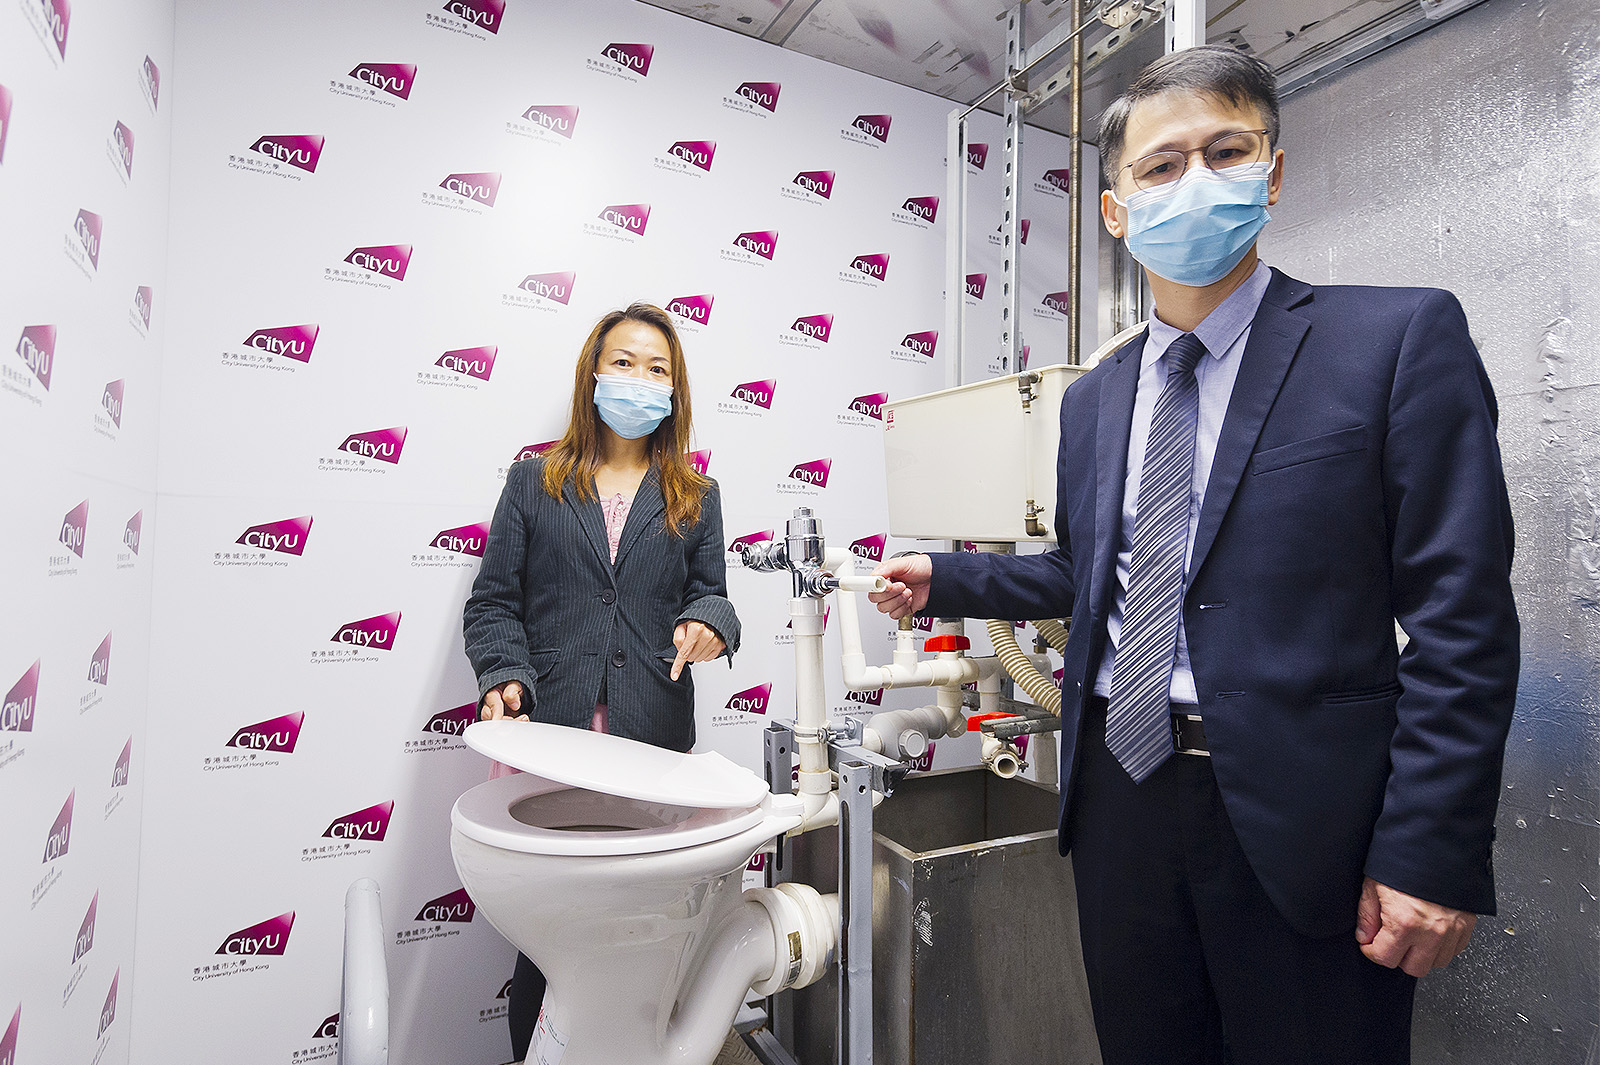 According to the findings of Professor Lai’s (right) research team, aerosol droplets can rise higher if a valve type flushing system is used. Dr Li reminds the public to clean washroom facilities regularly. 